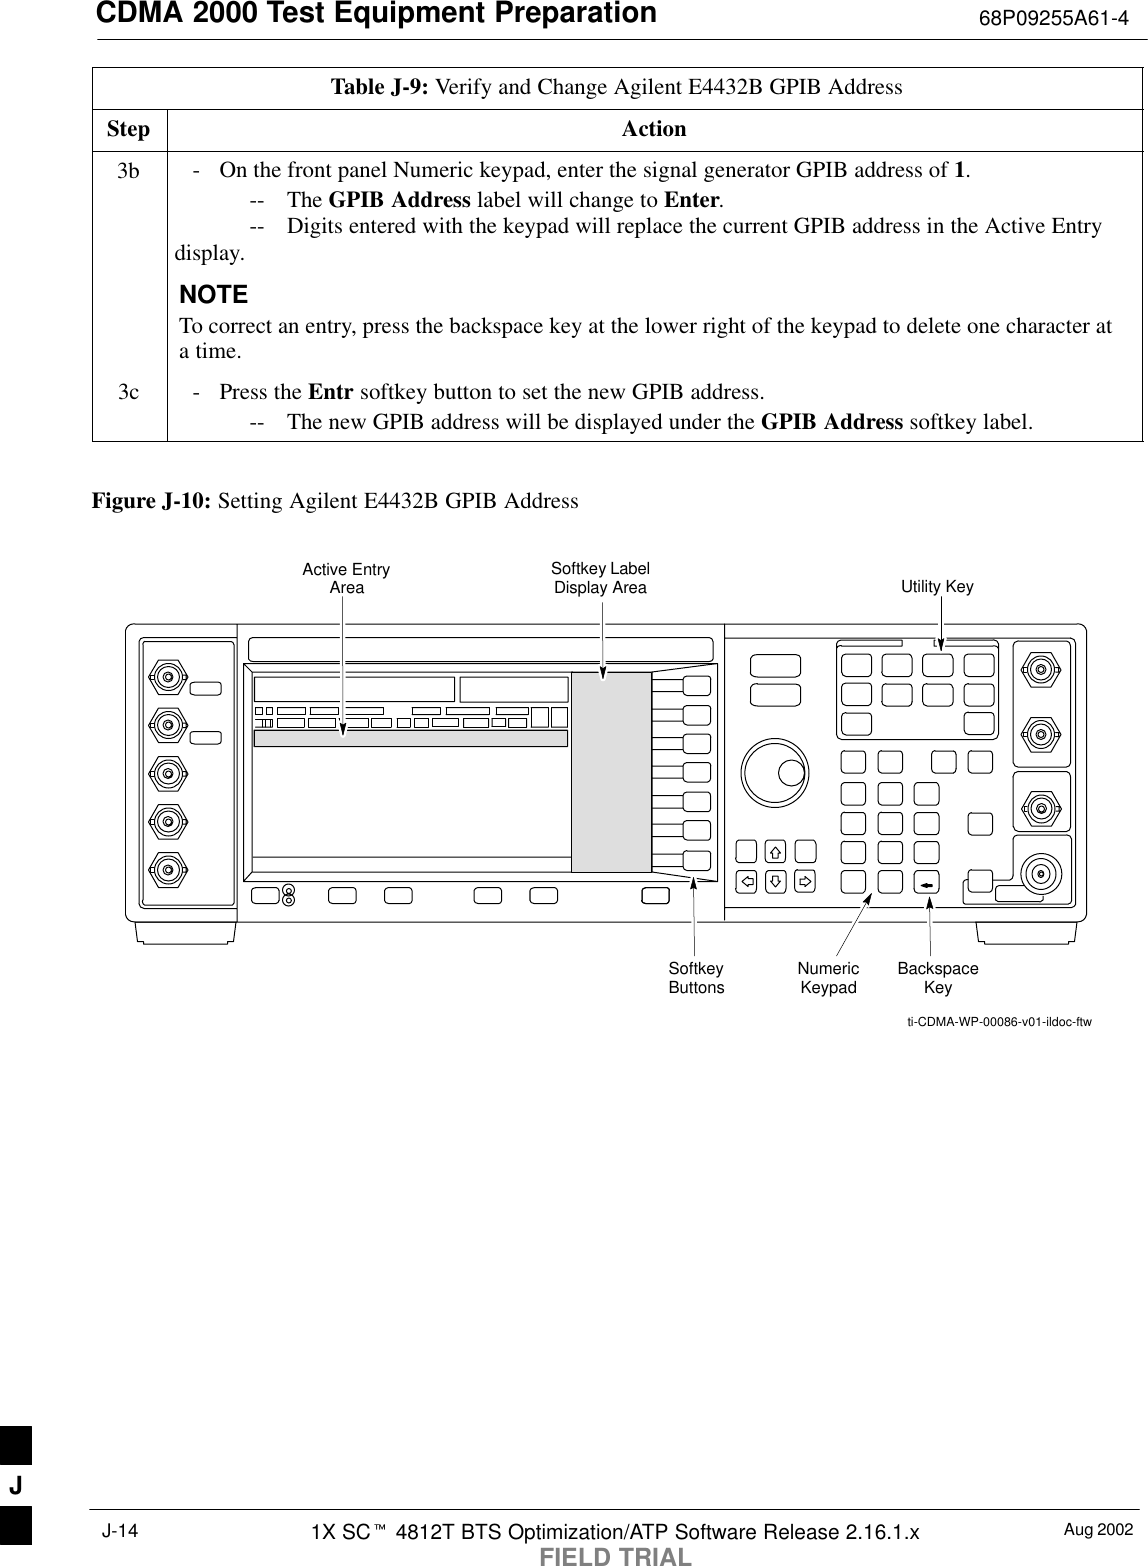 CDMA 2000 Test Equipment Preparation 68P09255A61-4Aug 20021X SCt 4812T BTS Optimization/ATP Software Release 2.16.1.xFIELD TRIALJ-14Table J-9: Verify and Change Agilent E4432B GPIB AddressStep Action3b - On the front panel Numeric keypad, enter the signal generator GPIB address of 1.-- The GPIB Address label will change to Enter.-- Digits entered with the keypad will replace the current GPIB address in the Active Entrydisplay.NOTETo correct an entry, press the backspace key at the lower right of the keypad to delete one character ata time.3c - Press the Entr softkey button to set the new GPIB address.-- The new GPIB address will be displayed under the GPIB Address softkey label. Figure J-10: Setting Agilent E4432B GPIB AddressNumericKeypadSoftkeyButtonsSoftkey LabelDisplay AreaActive EntryAreaBackspaceKeyUtility Keyti-CDMA-WP-00086-v01-ildoc-ftwJ